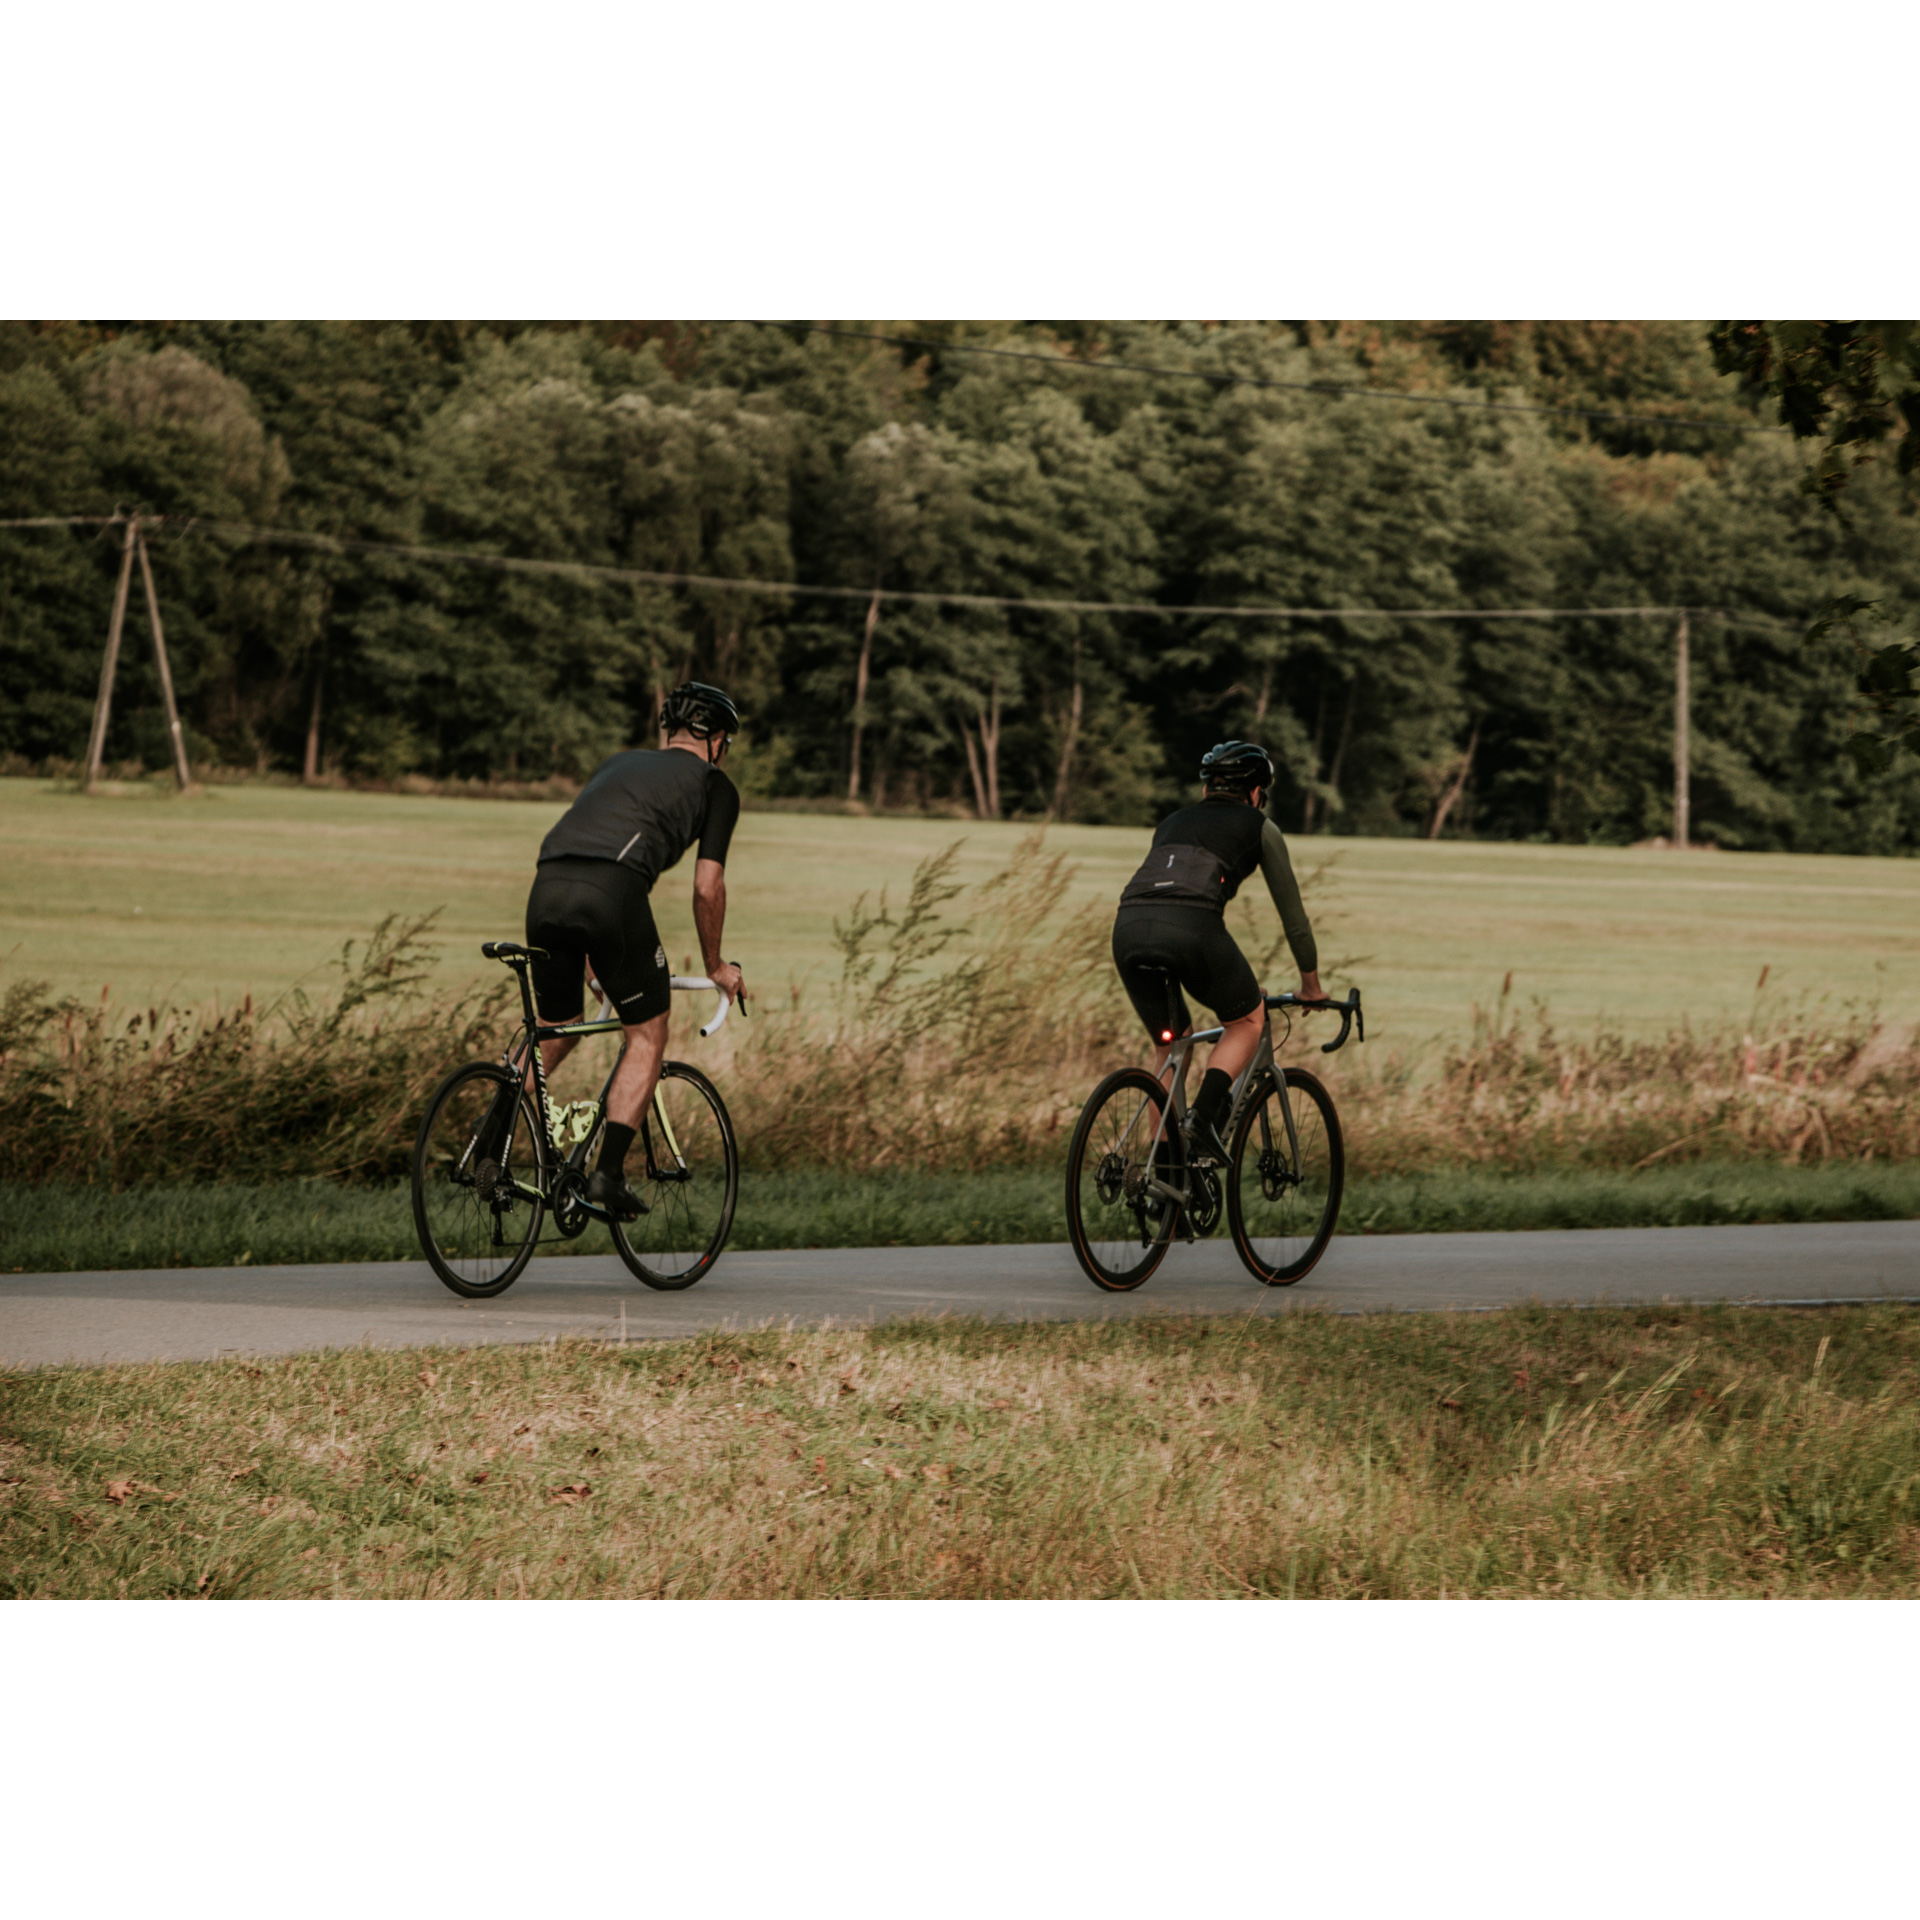 Two cyclists in black cycling clothes and helmets riding on an asphalt road running between green meadows, green trees in the background